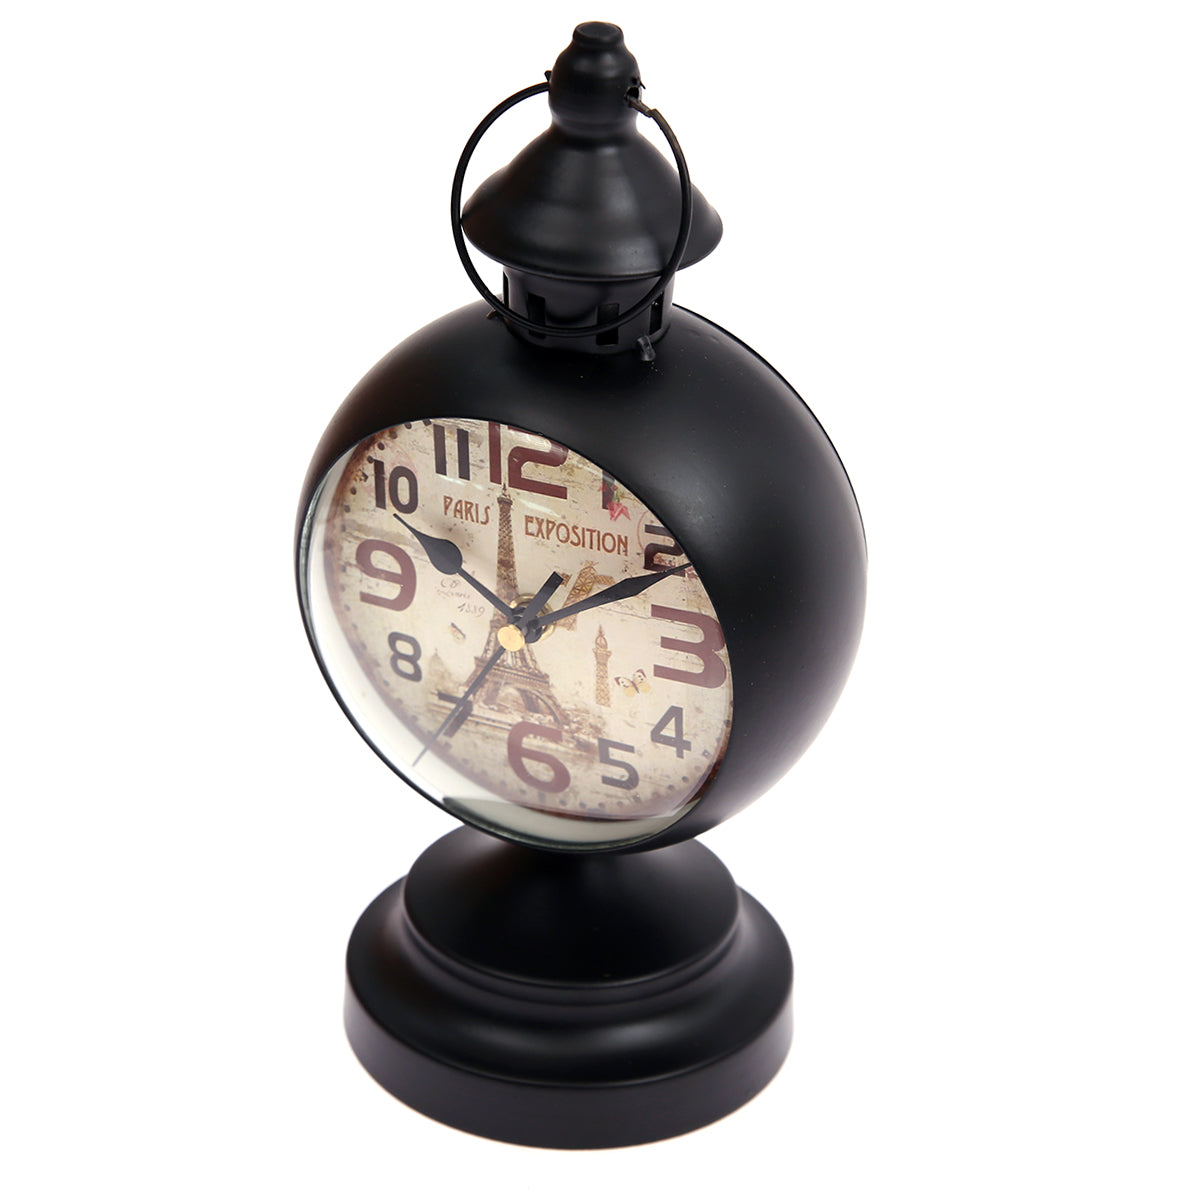 Table Clock.DR319